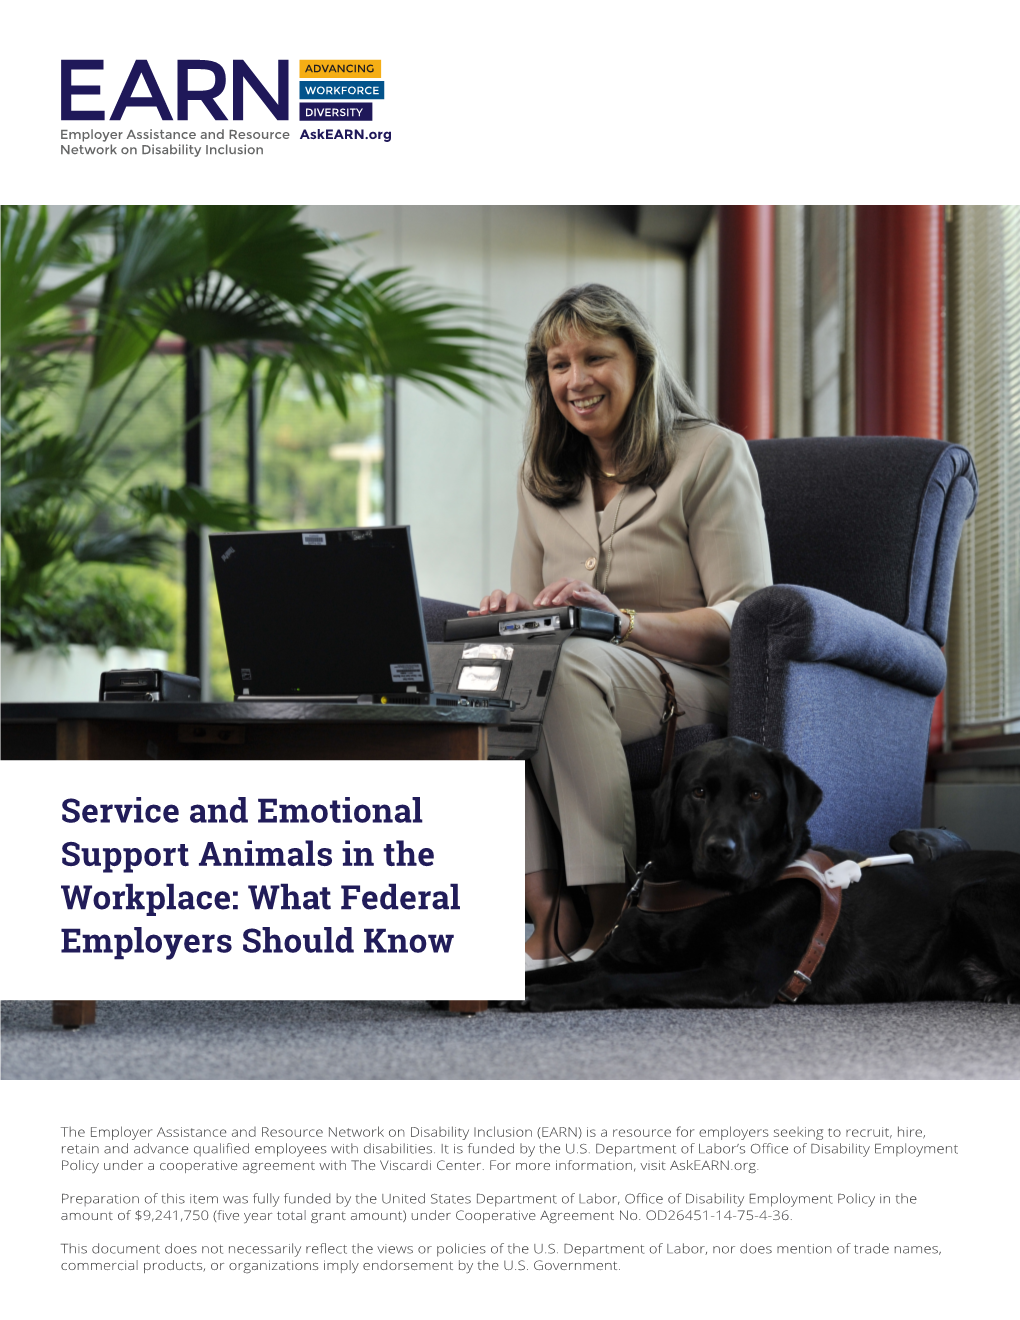 Service and Emotional Support Animals in the Workplace: What Federal Employers Should Know